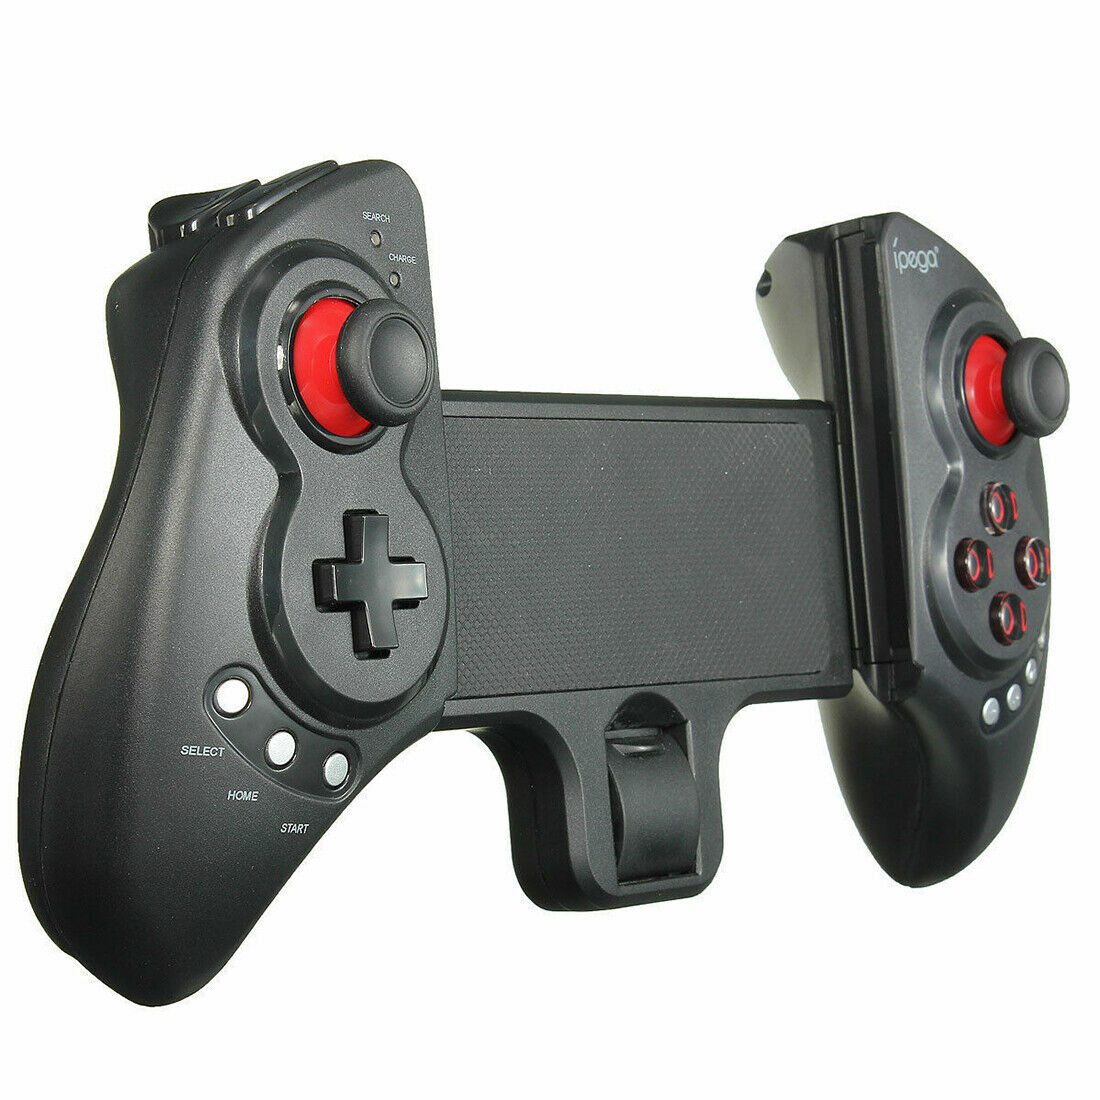 Wireless Bluetooth Game Pad Controller For iOS Android Tablet - Lifafa Denmark